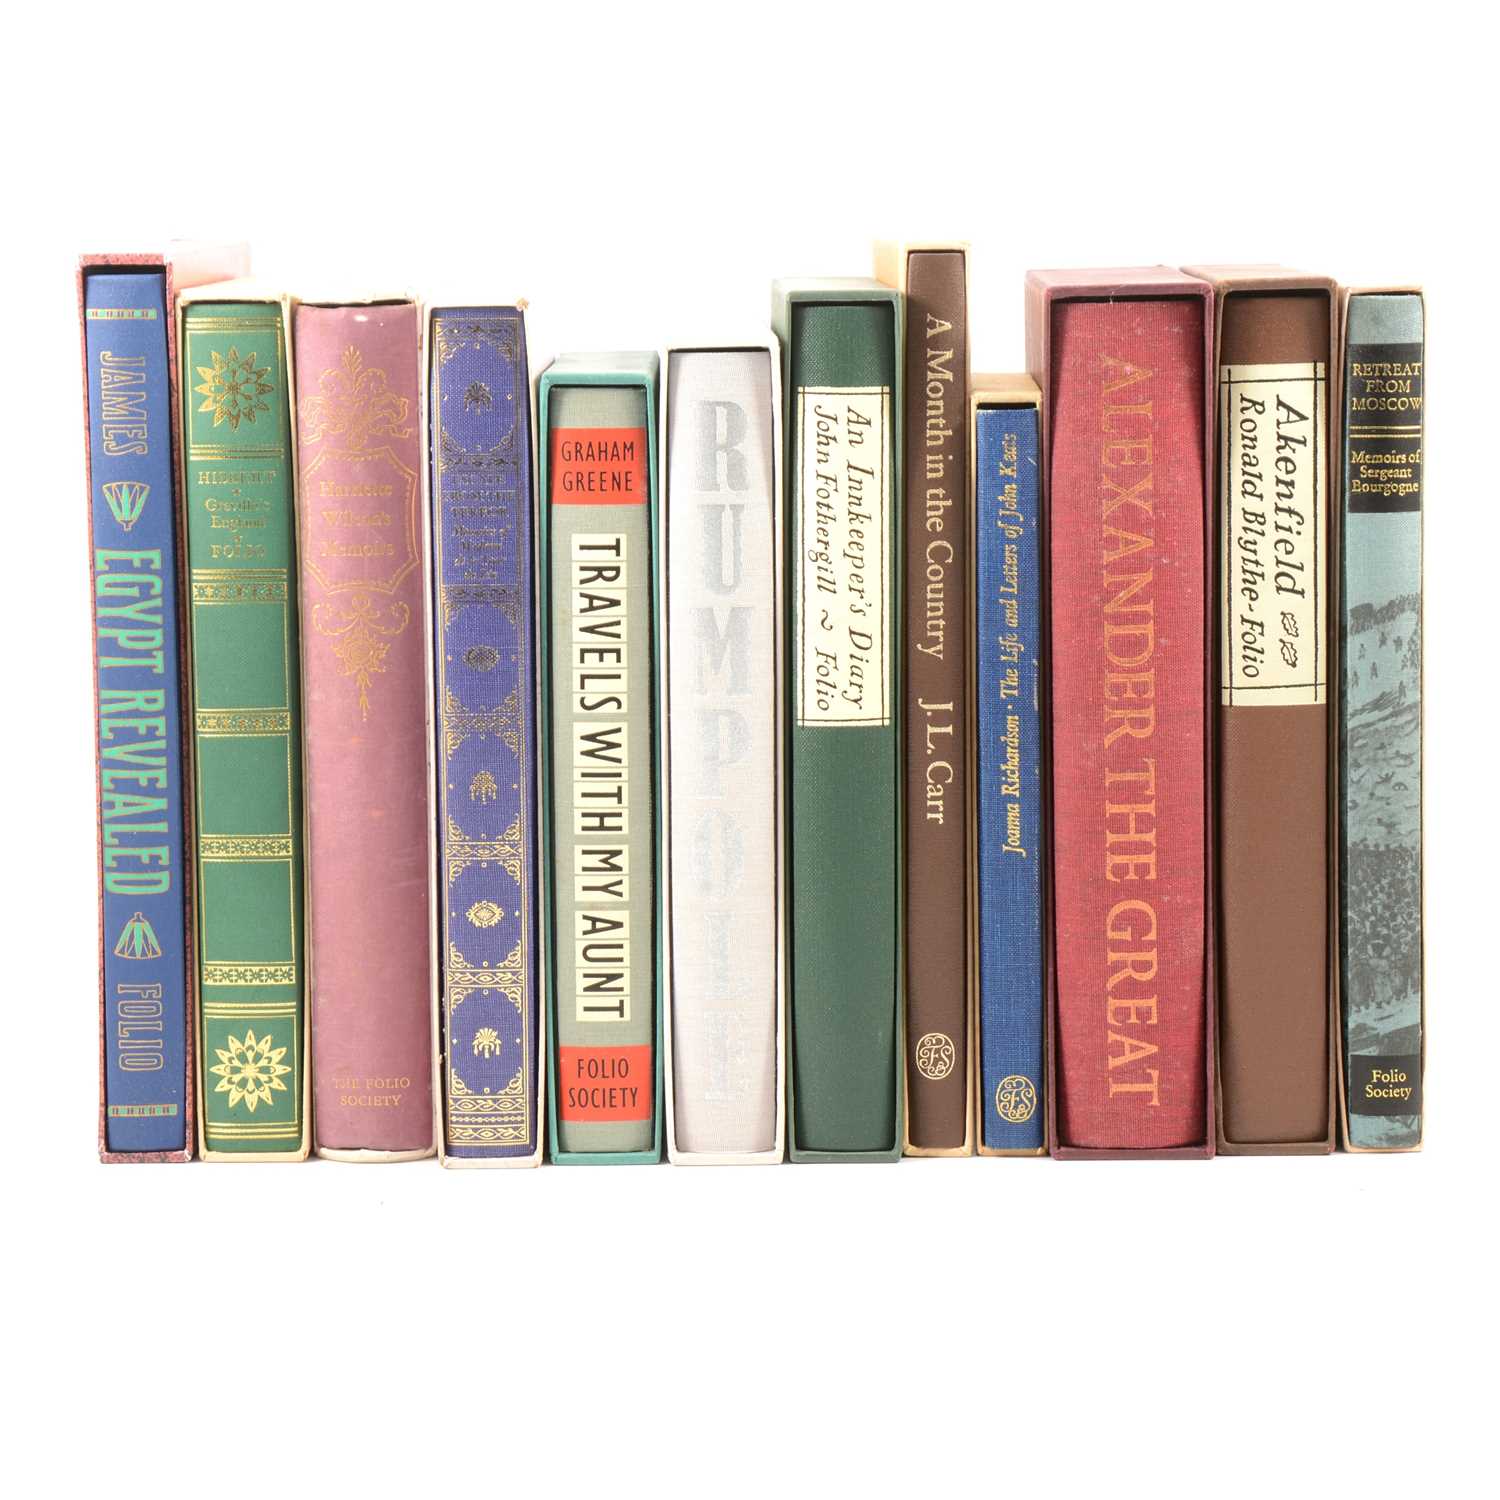 The Folio Society, a small library of books